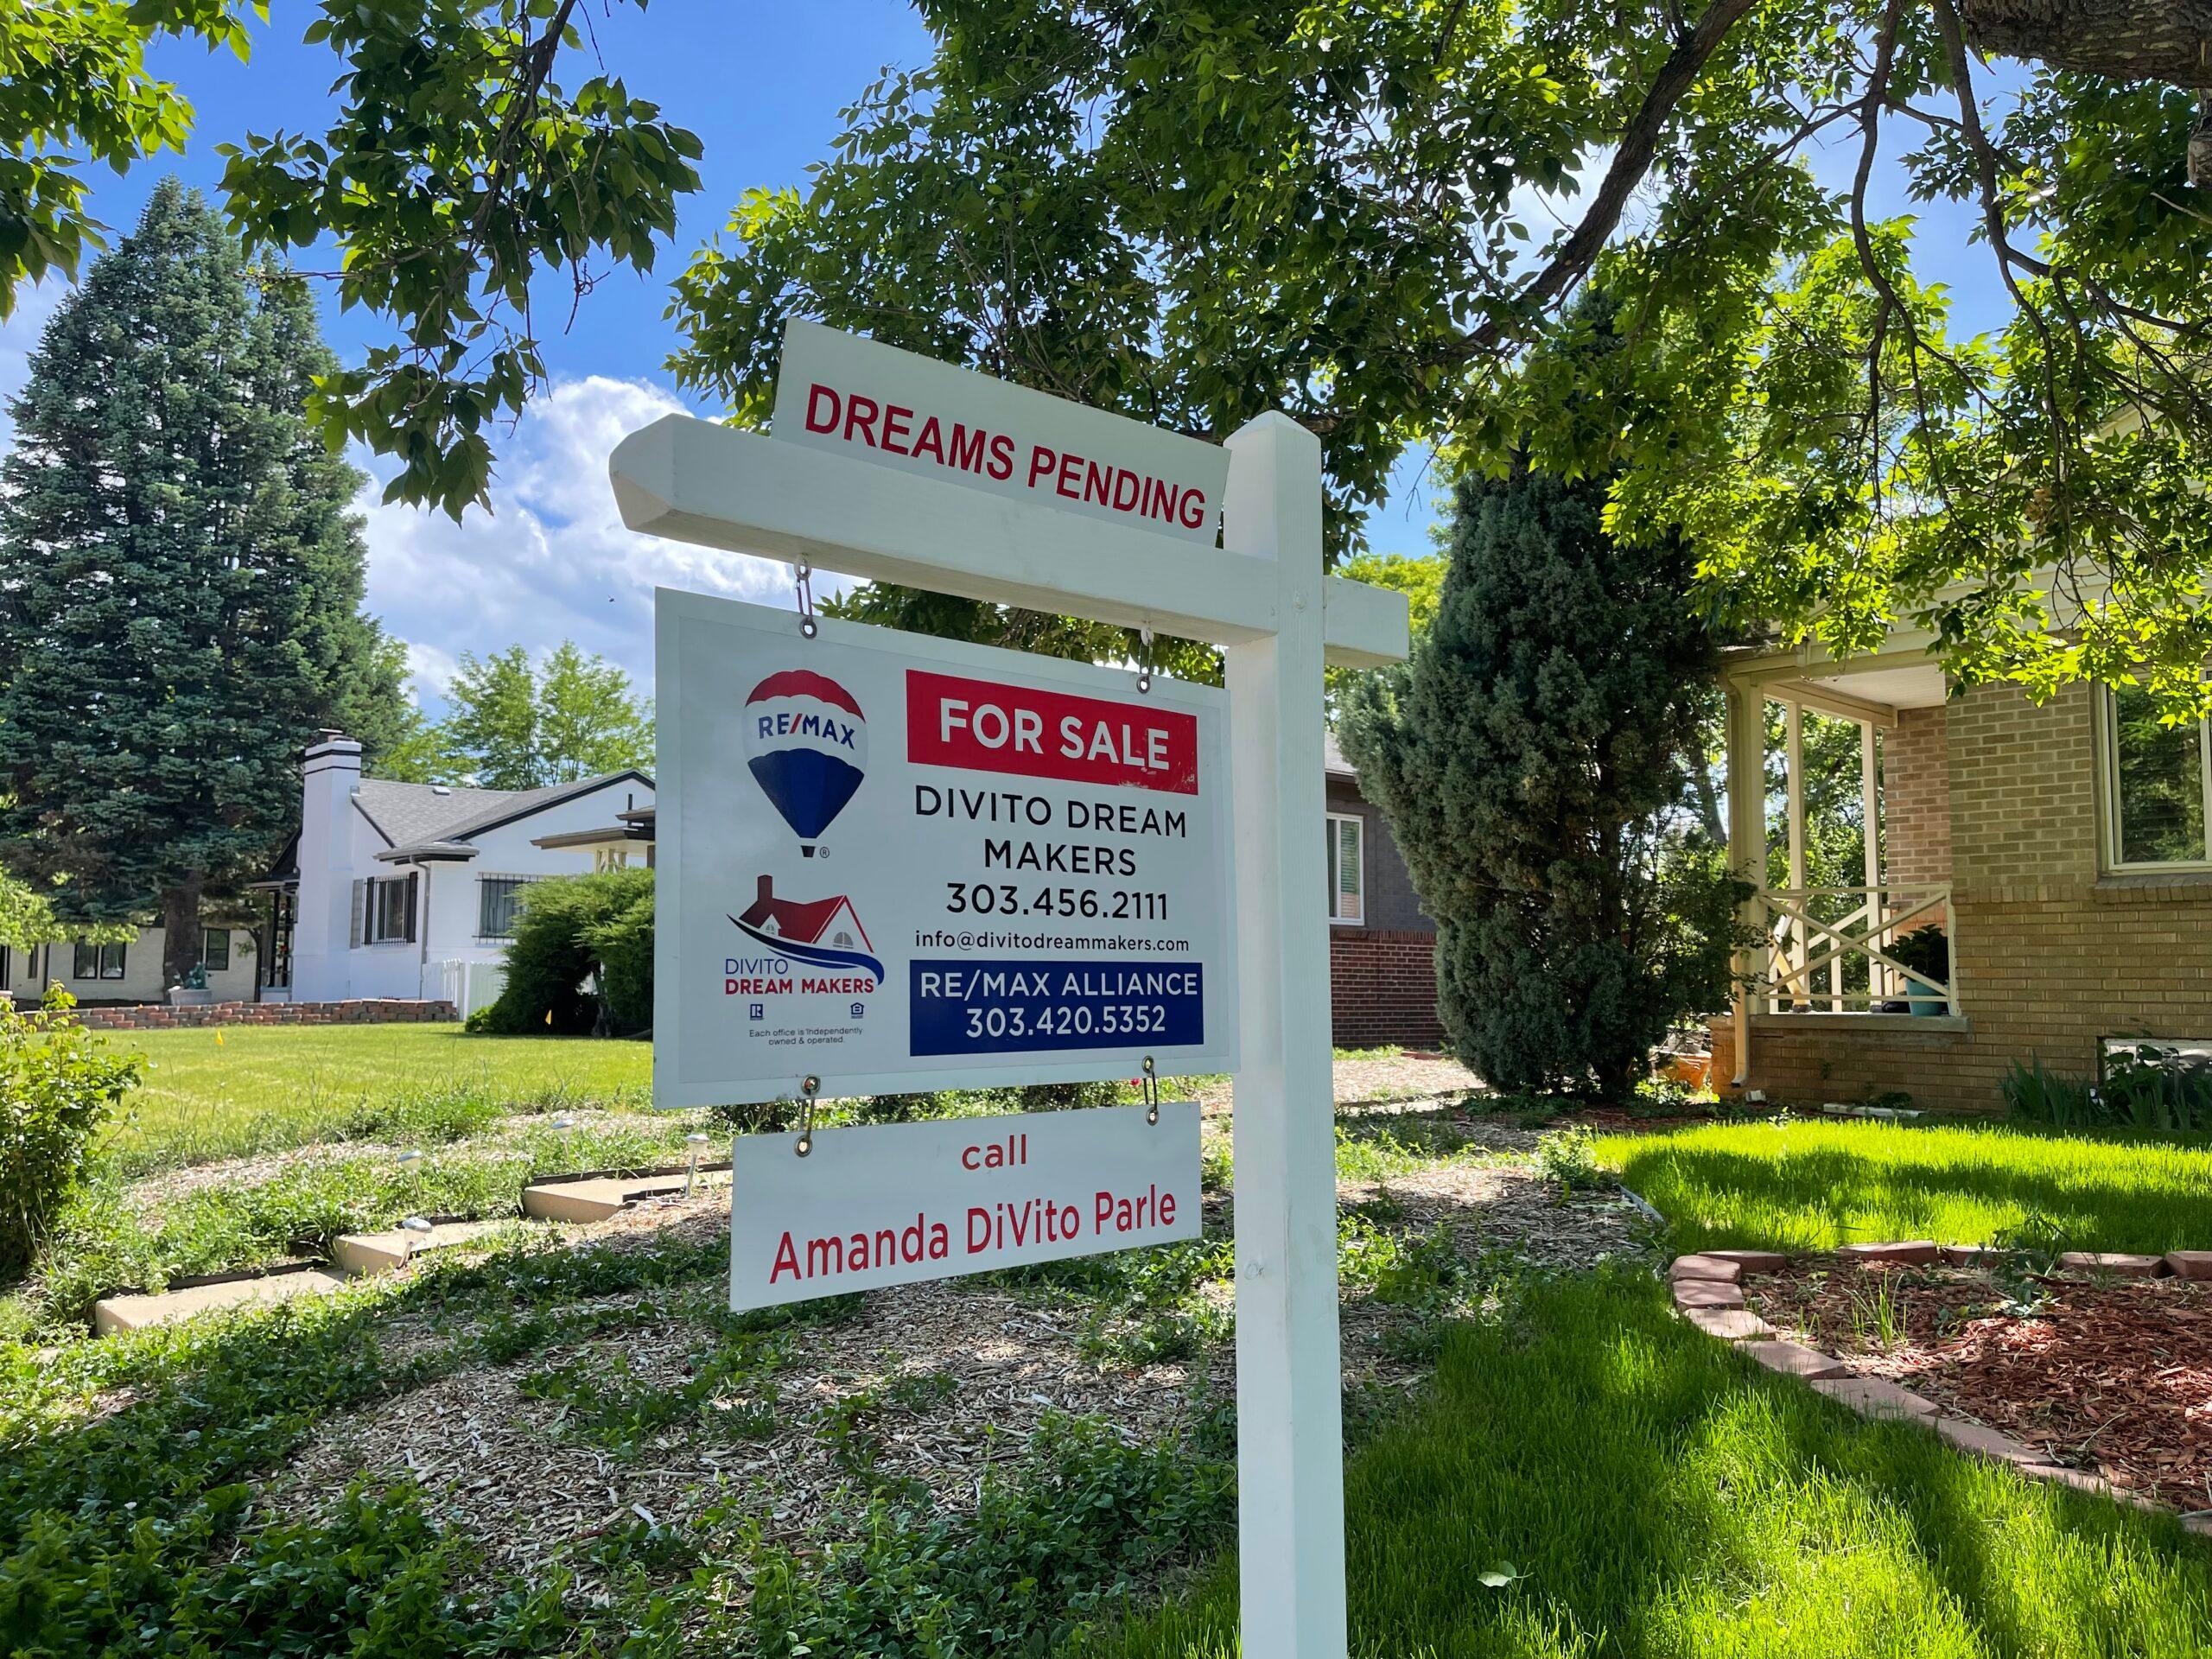 A real estate sign in Park Hill states "Dreams Pending."